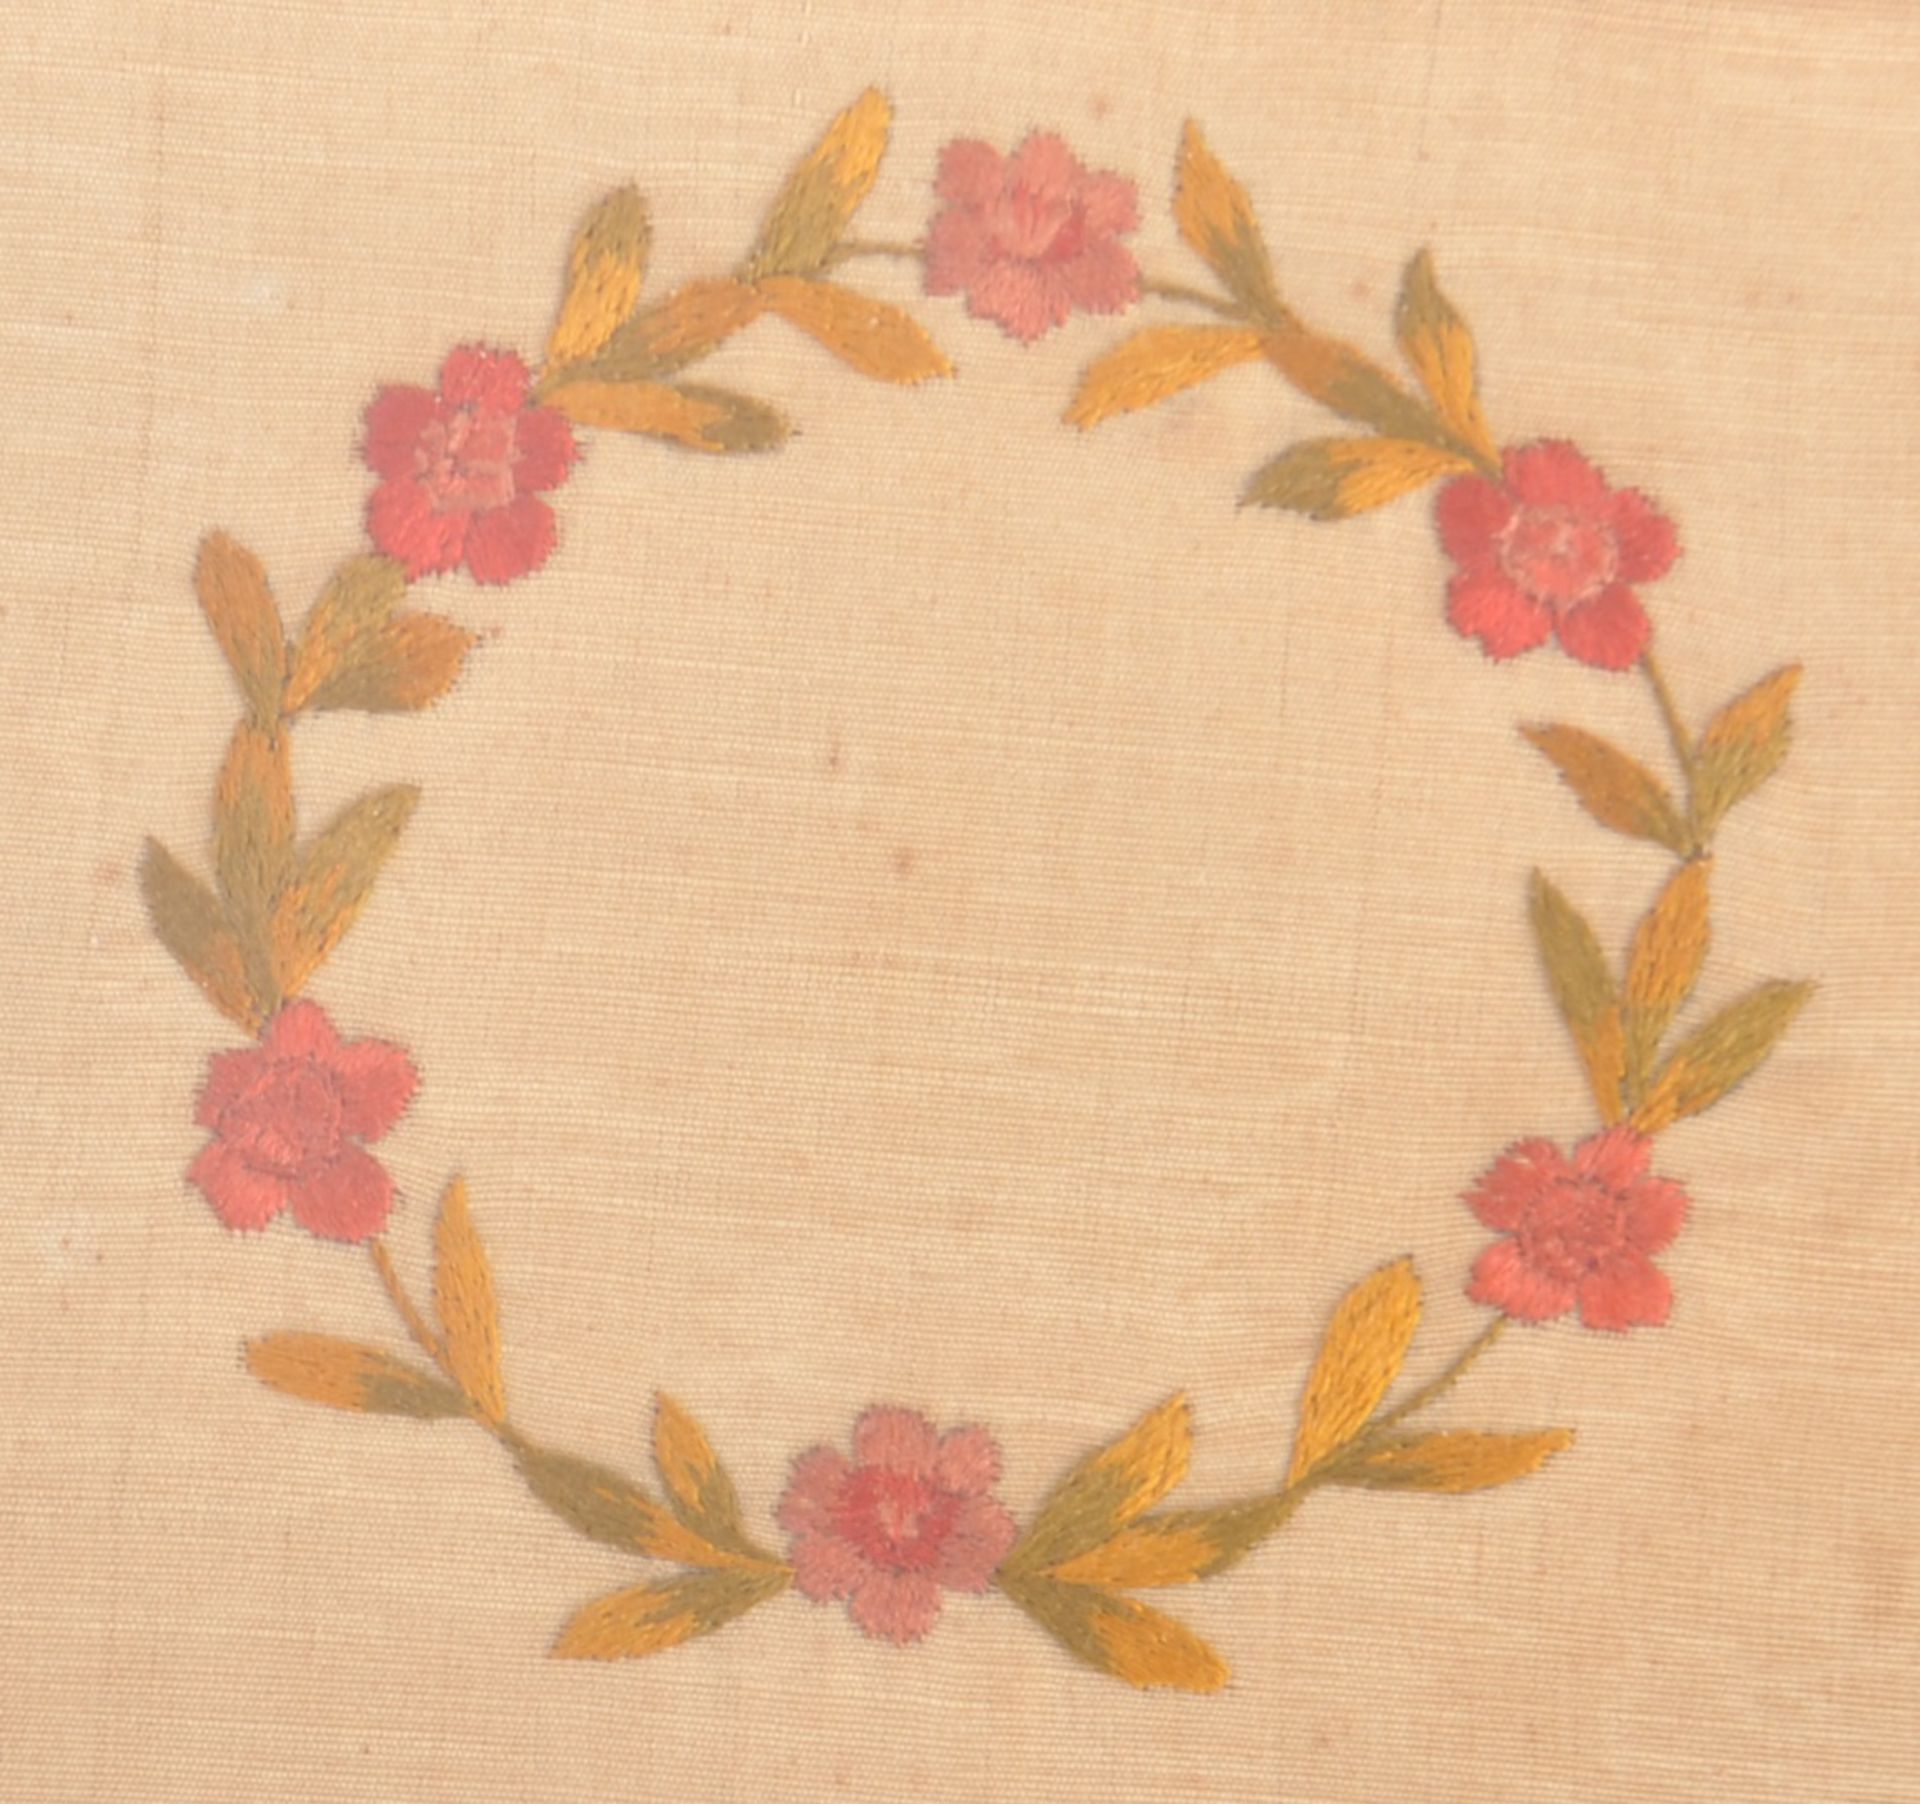 19TH CENTURY VICTORIAN NEEDLEWORK FLORAL PANEL - Image 3 of 4